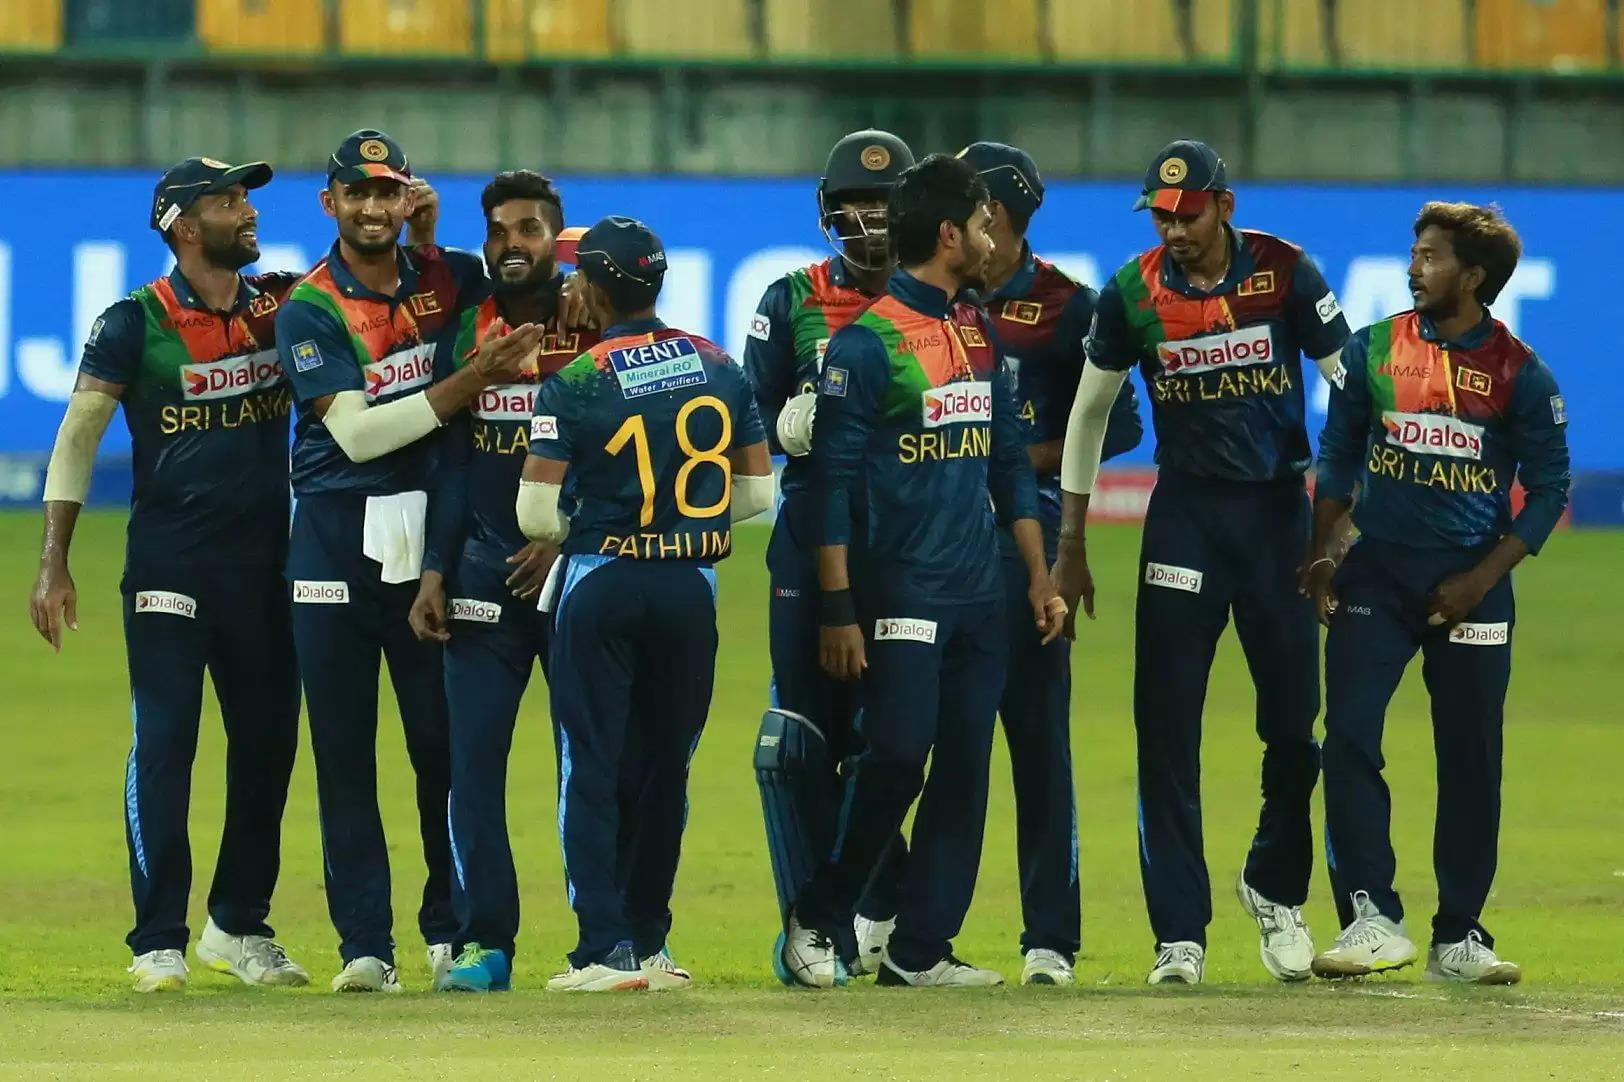 SL vs BAN Dream11 Prediction for ICC T20 World Cup 2021: Playing XI, Fantasy Cricket Tips, Team, Weather Updates and Pitch Report